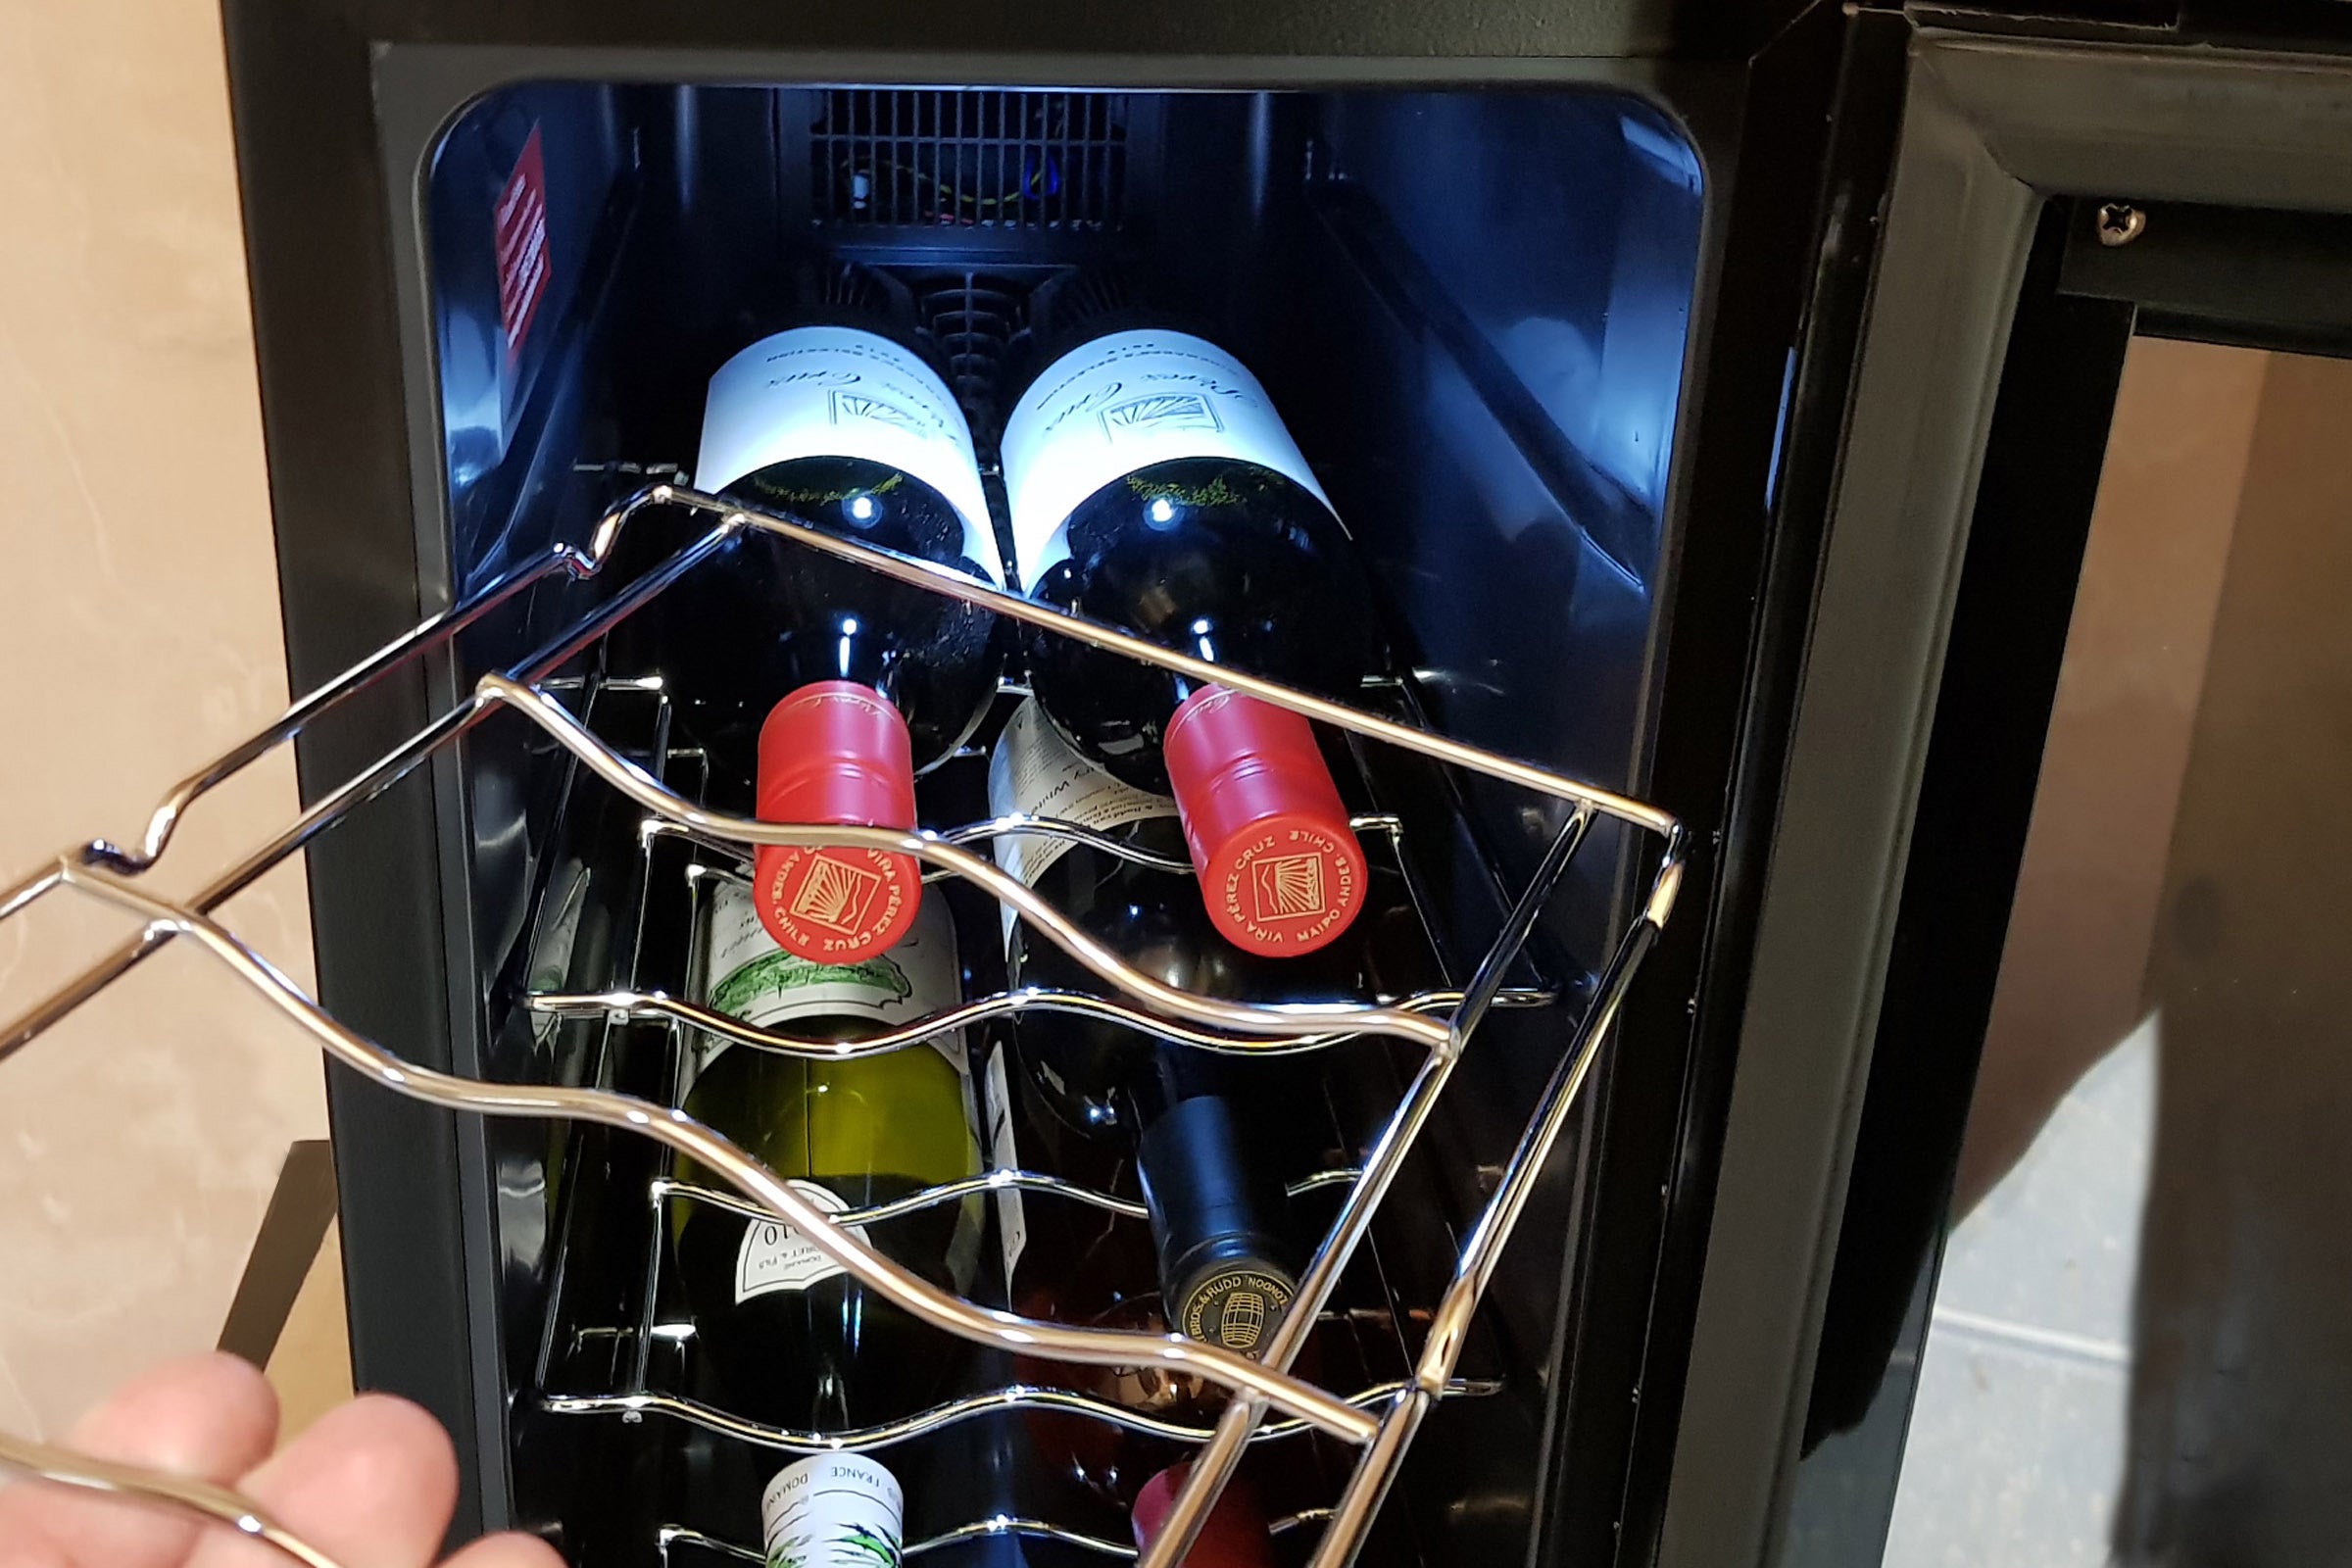 Russell Hobbs RH8WC2 wine cooler with bottles inside.